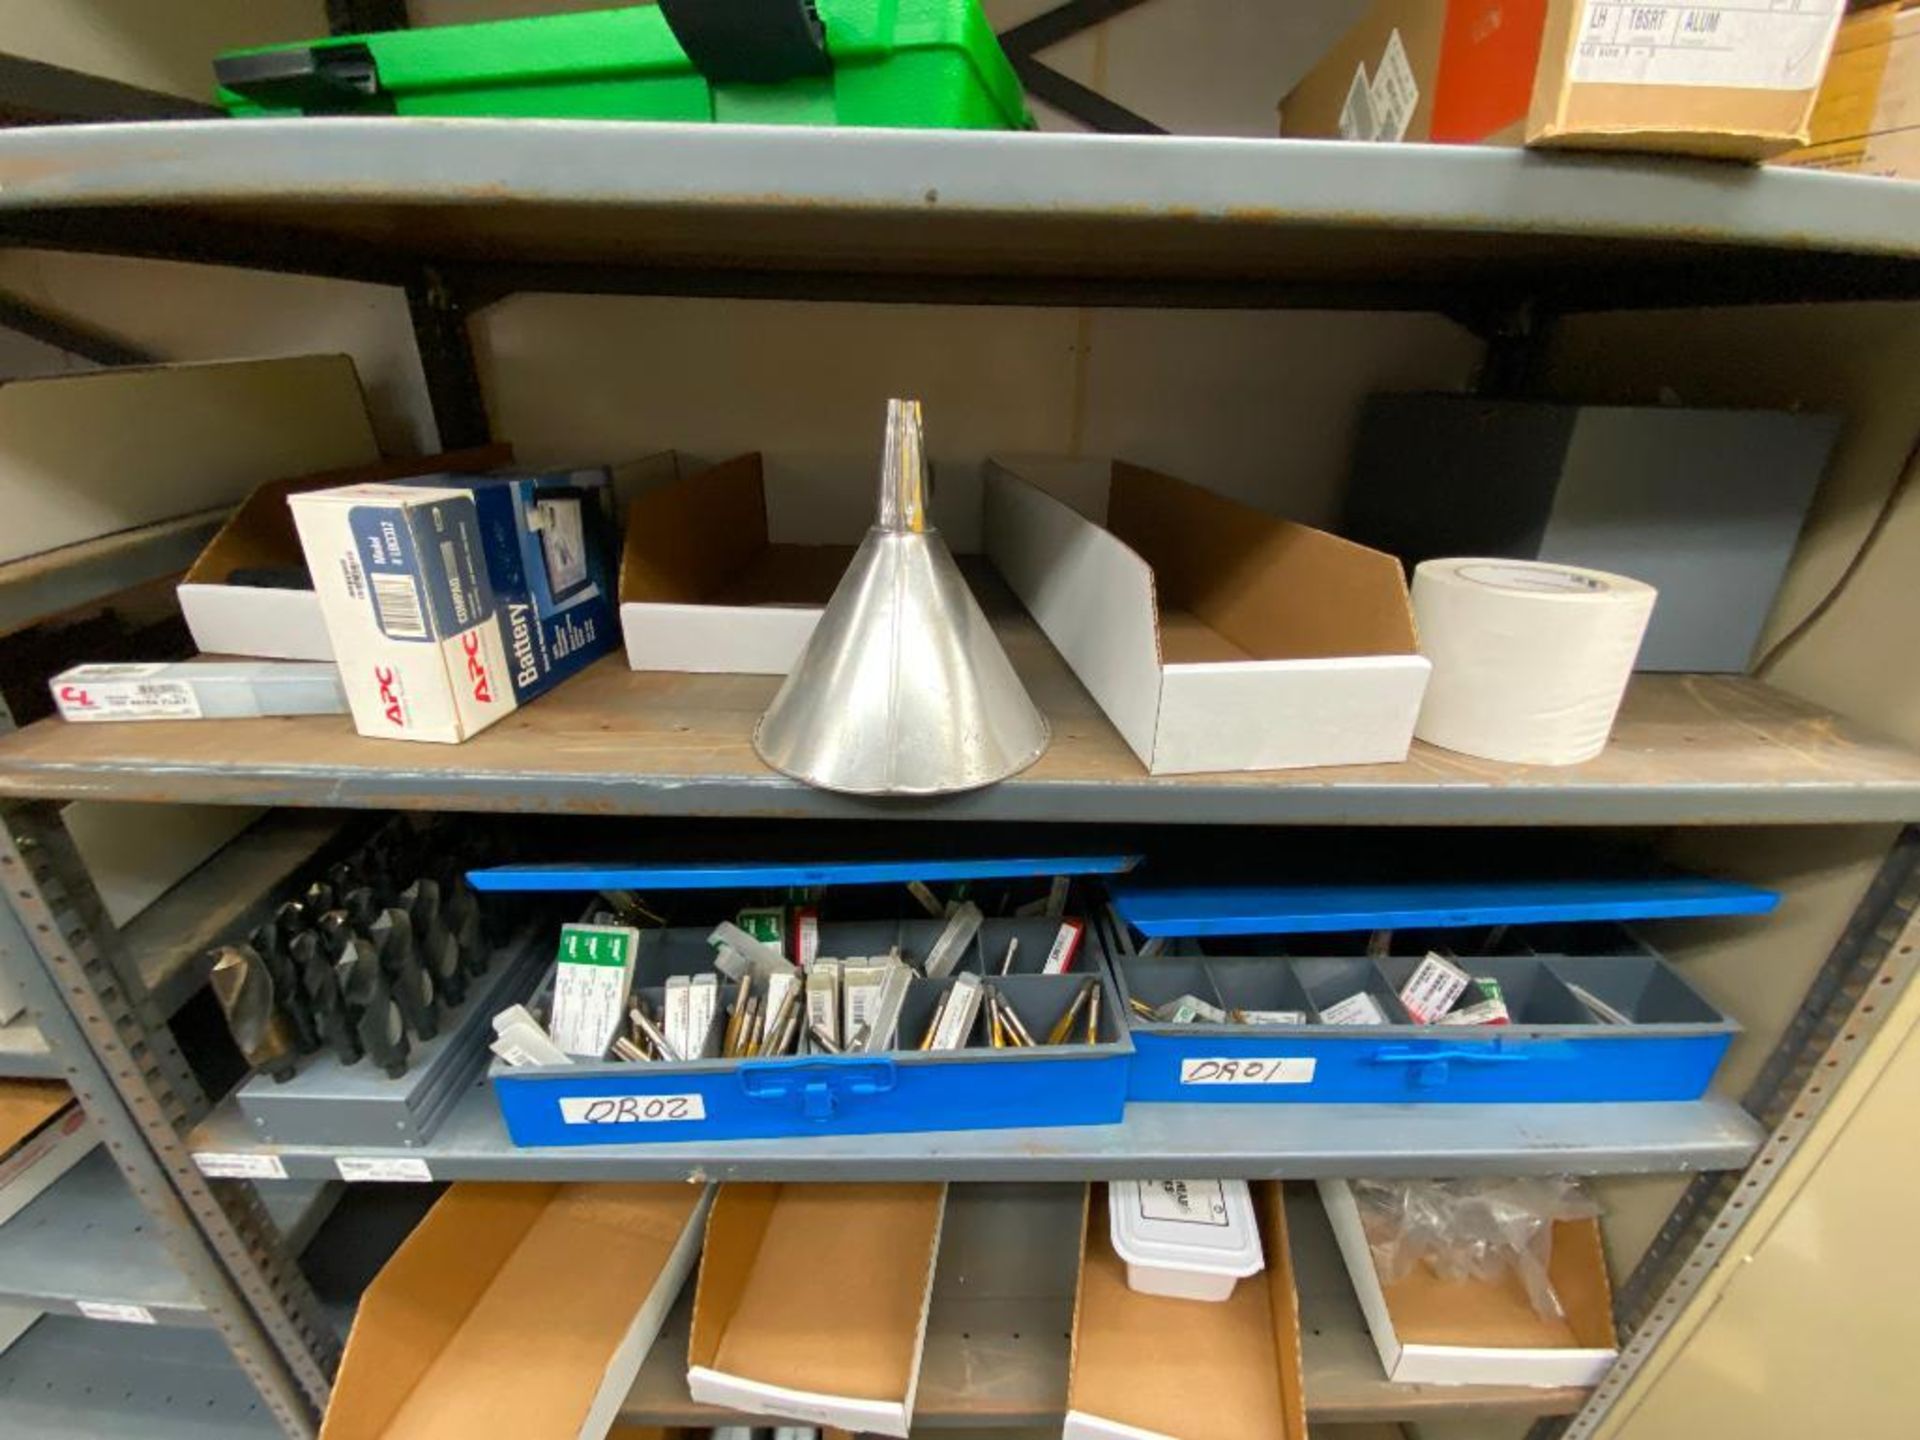 contents of supply room, JustRite flammable storage cabinets, SPX pump, assorted bits, Cryospray, in - Image 10 of 31